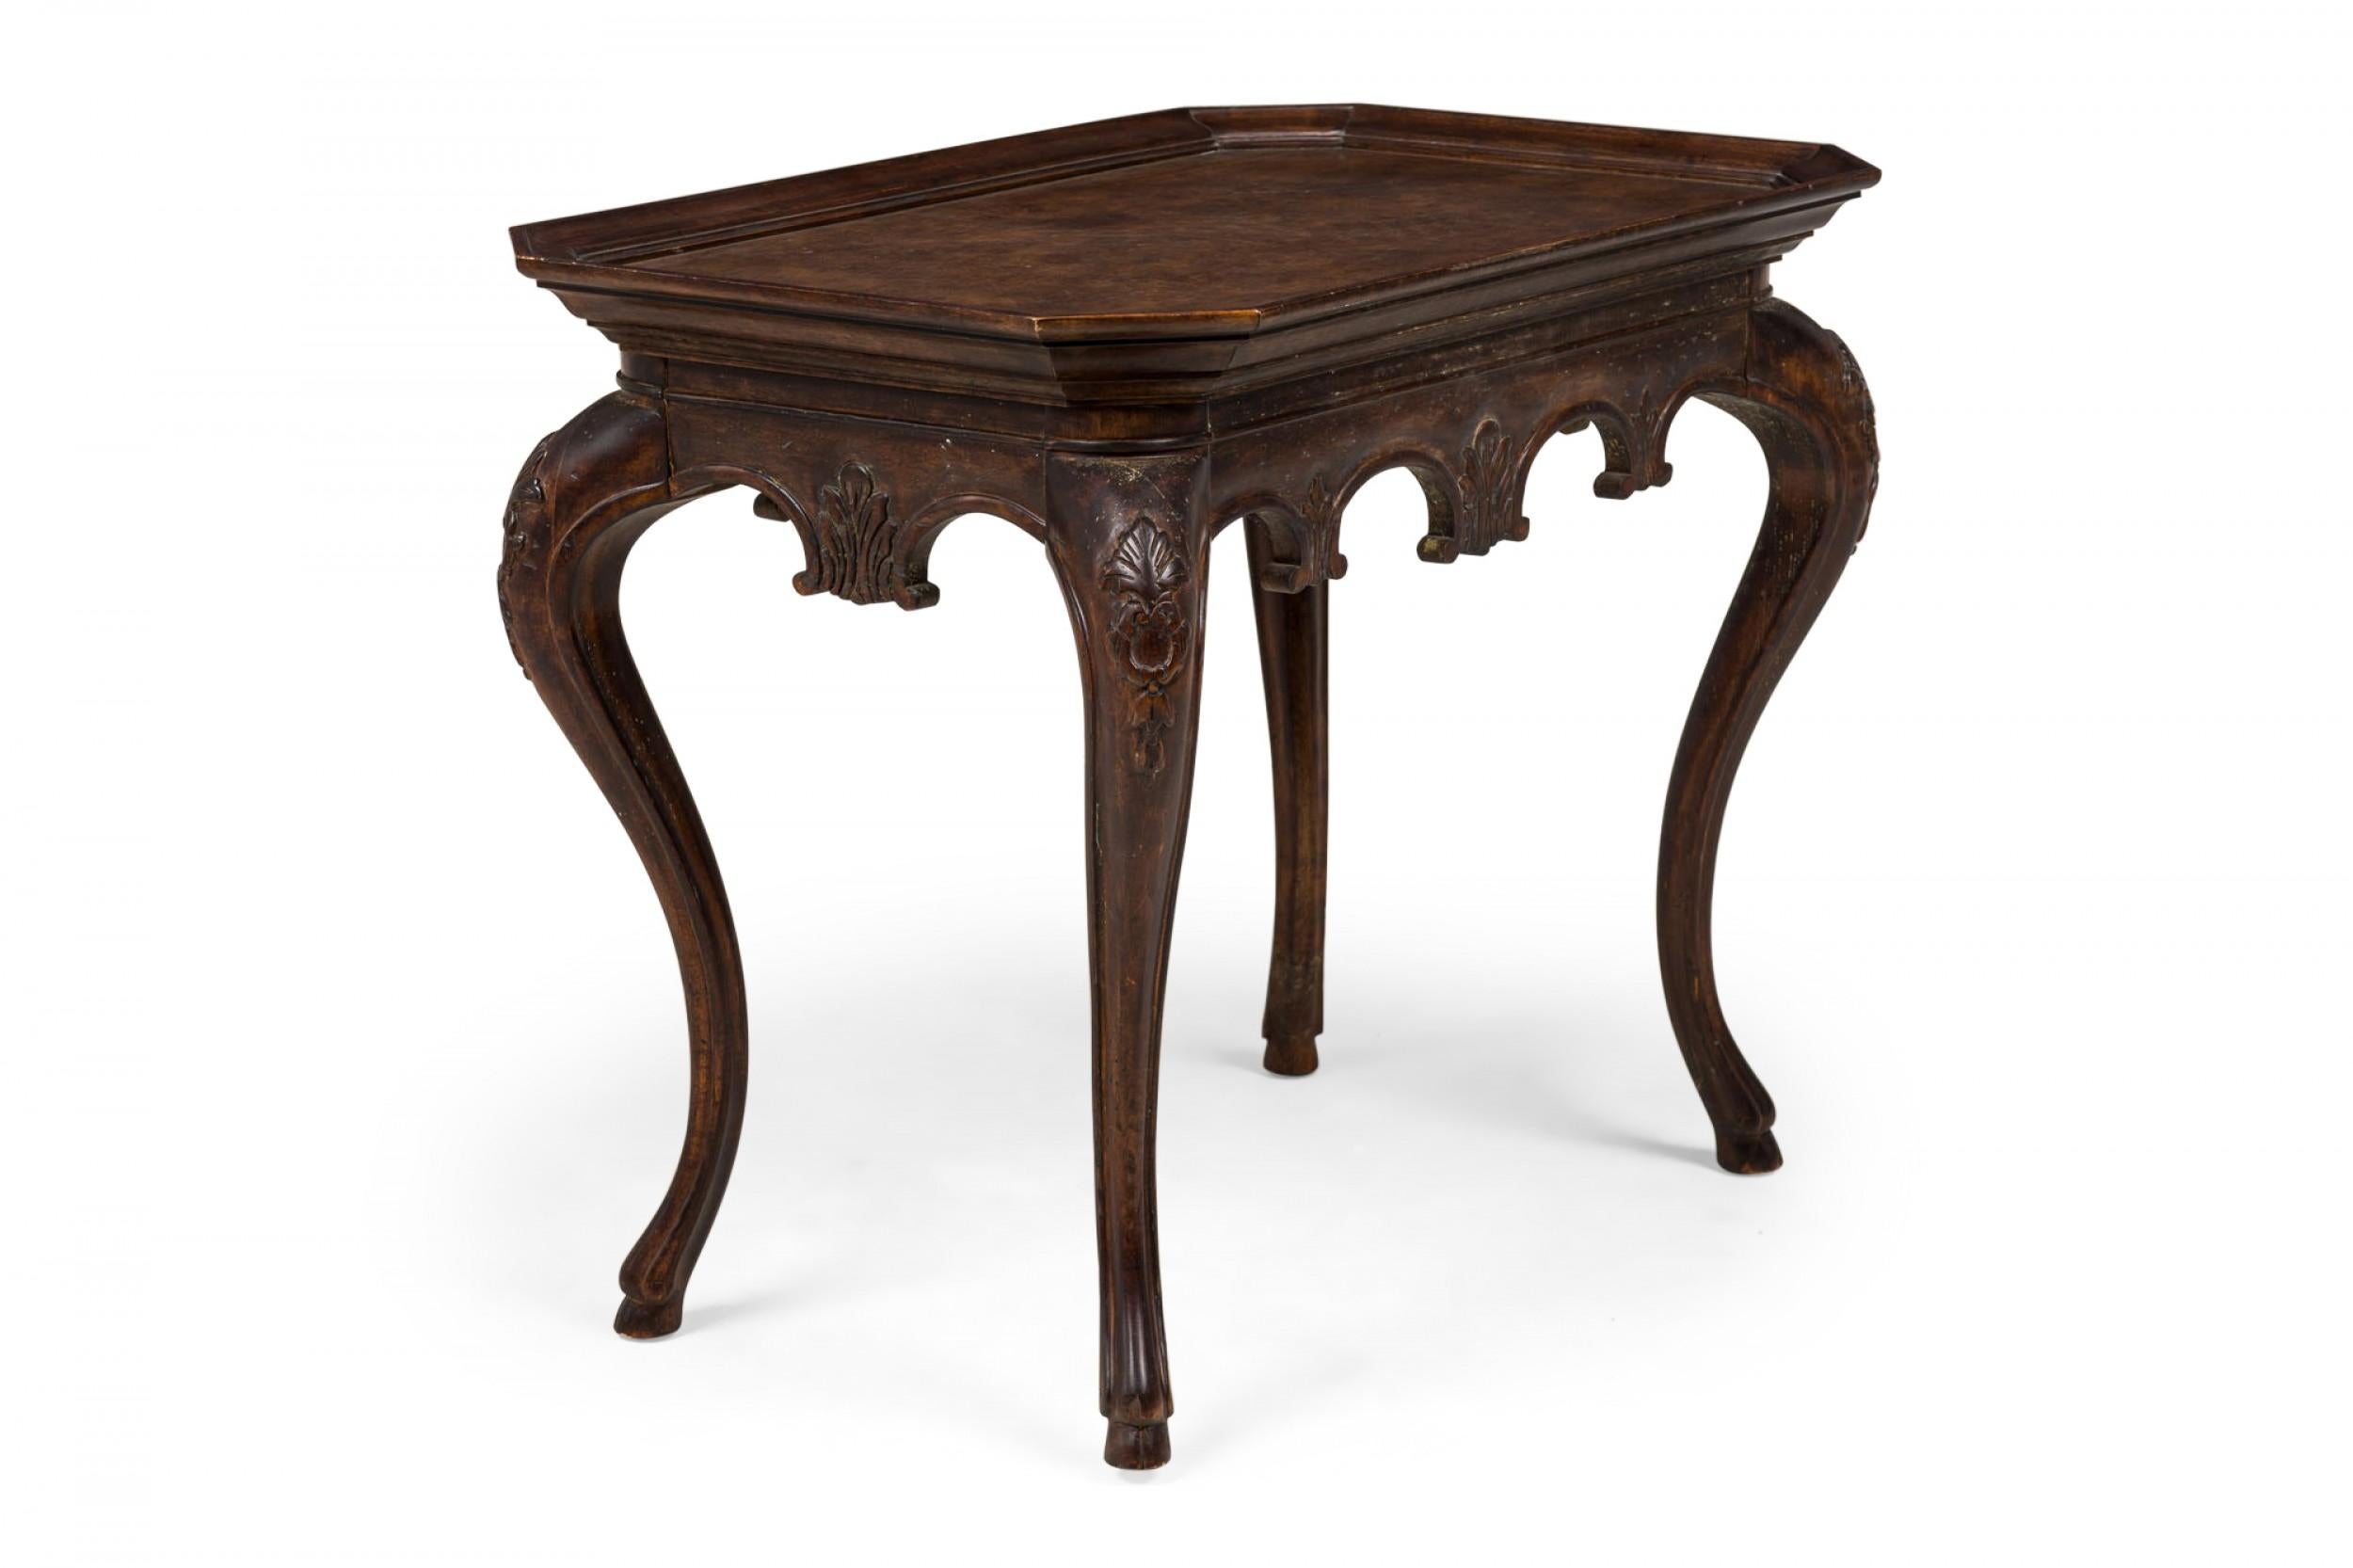 French Victorian-Style rectangular console / occasional table with an angled shallow beveled gallery around a marble veneer table top with canted corners, with carved apron and embellishments at the top curvature of the four cabriole legs.